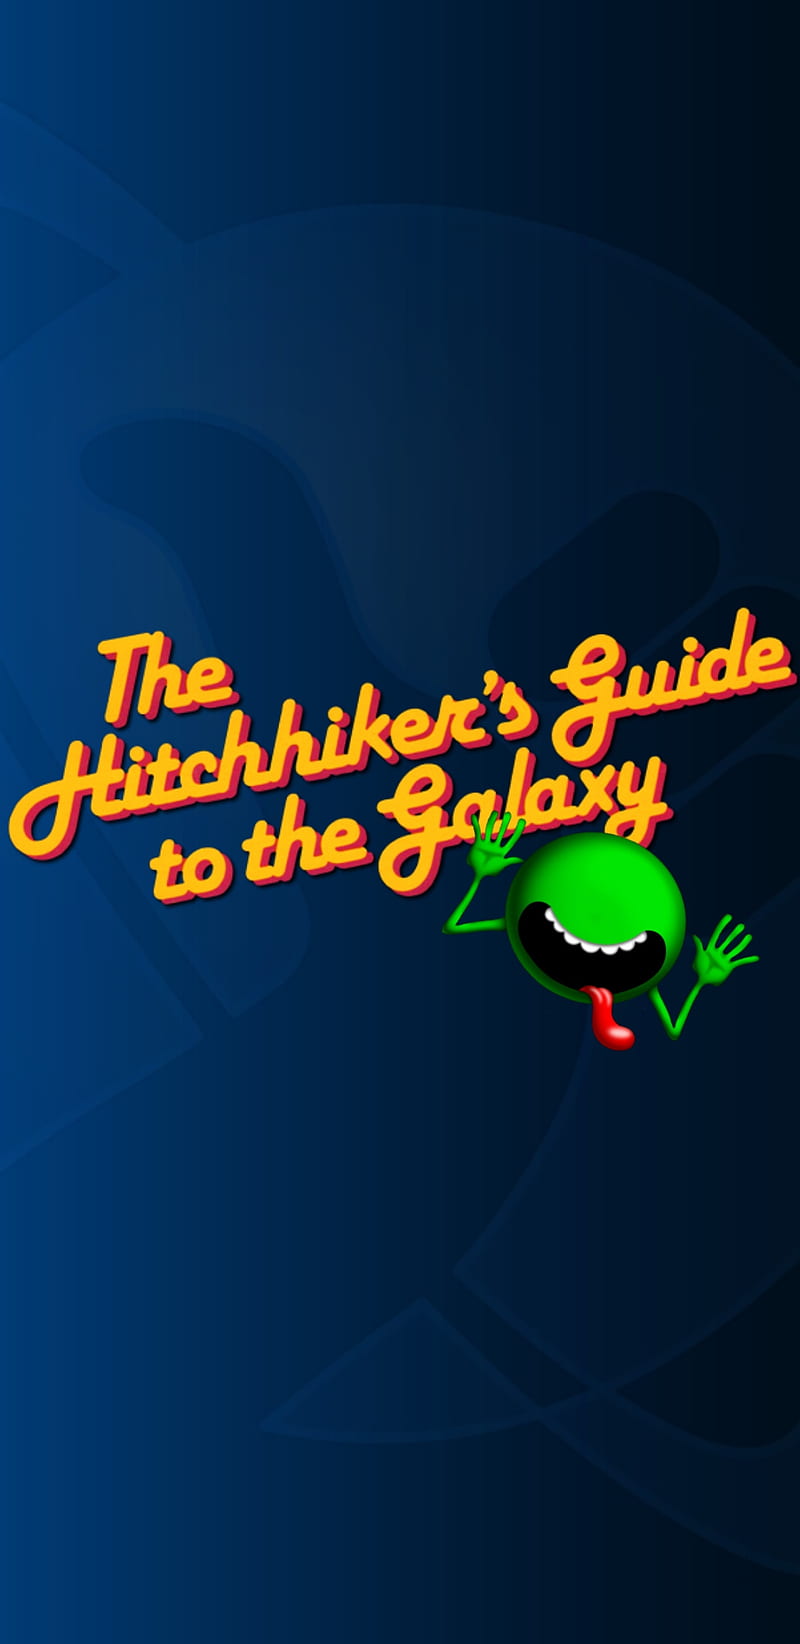 Hitchhikers Guide, HD phone wallpaper